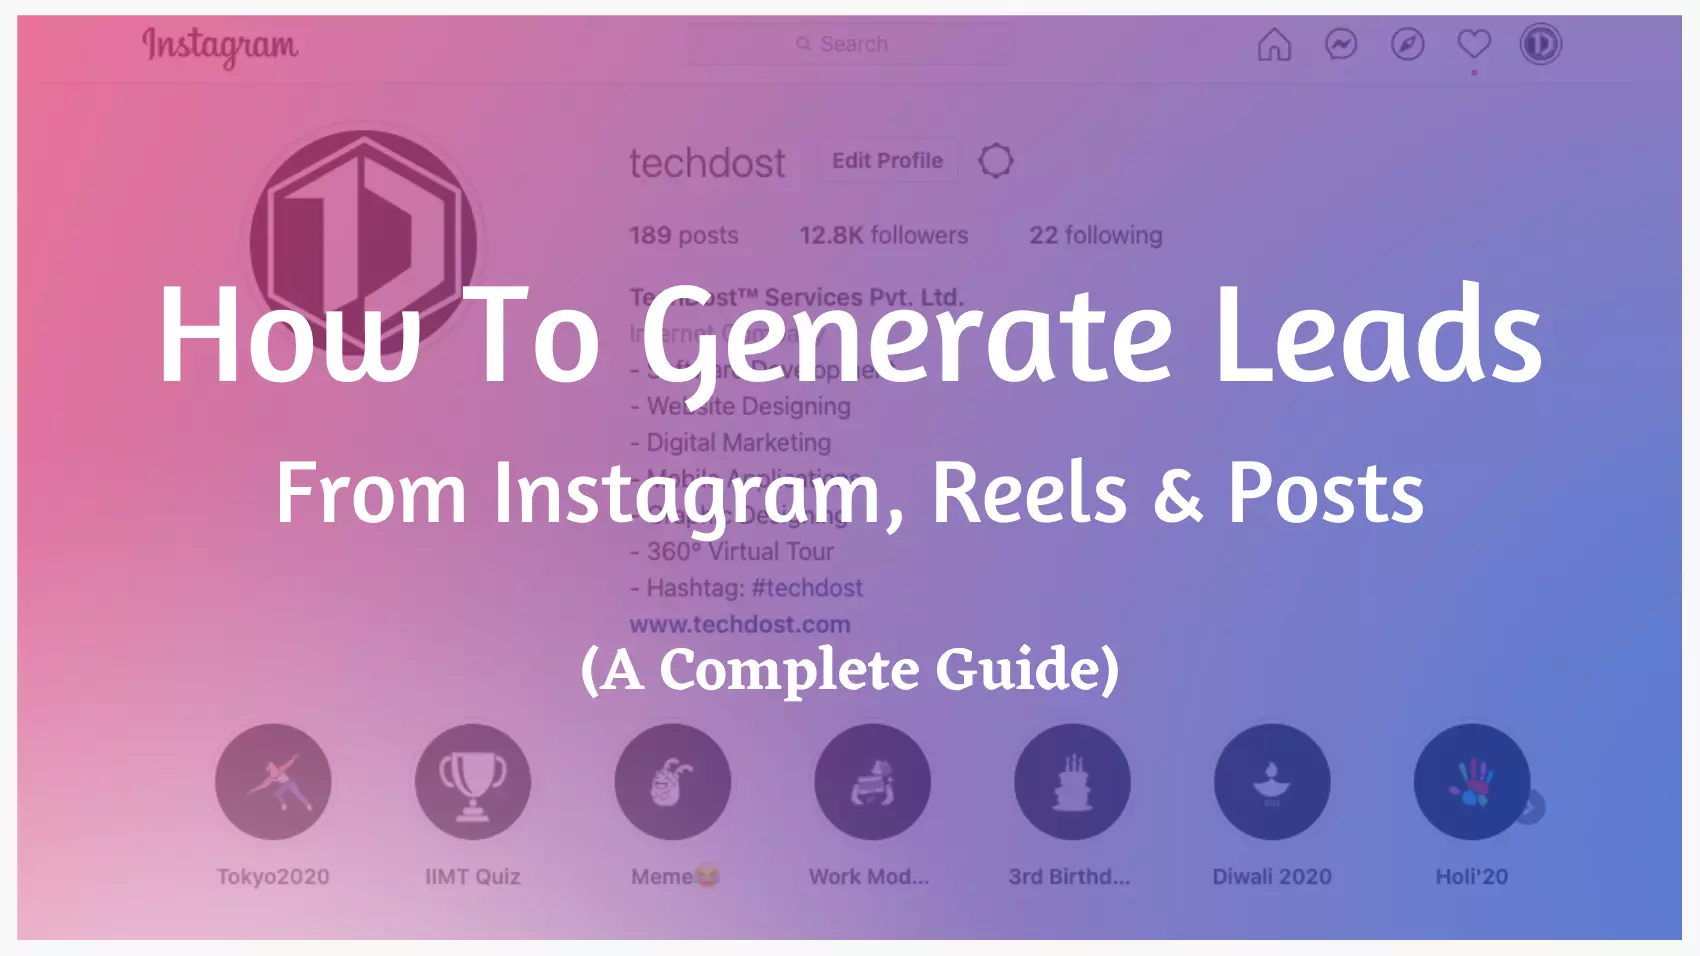 How-To-Generate-Leads-From-Instagram-or-Reels-Posts